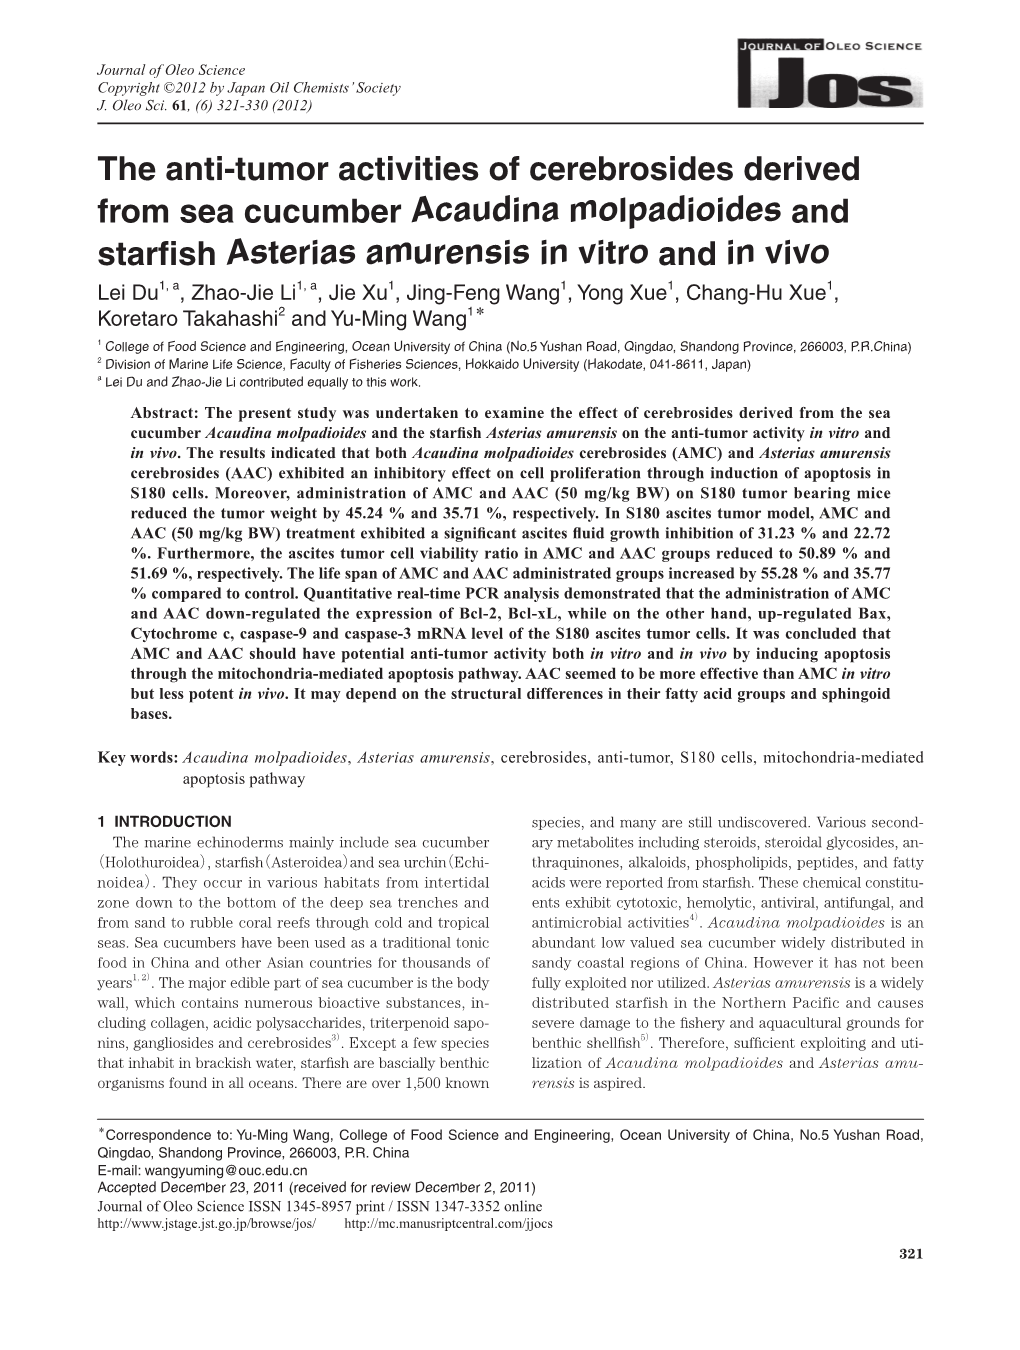 The Anti-Tumor Activities of Cerebrosides Derived from Sea